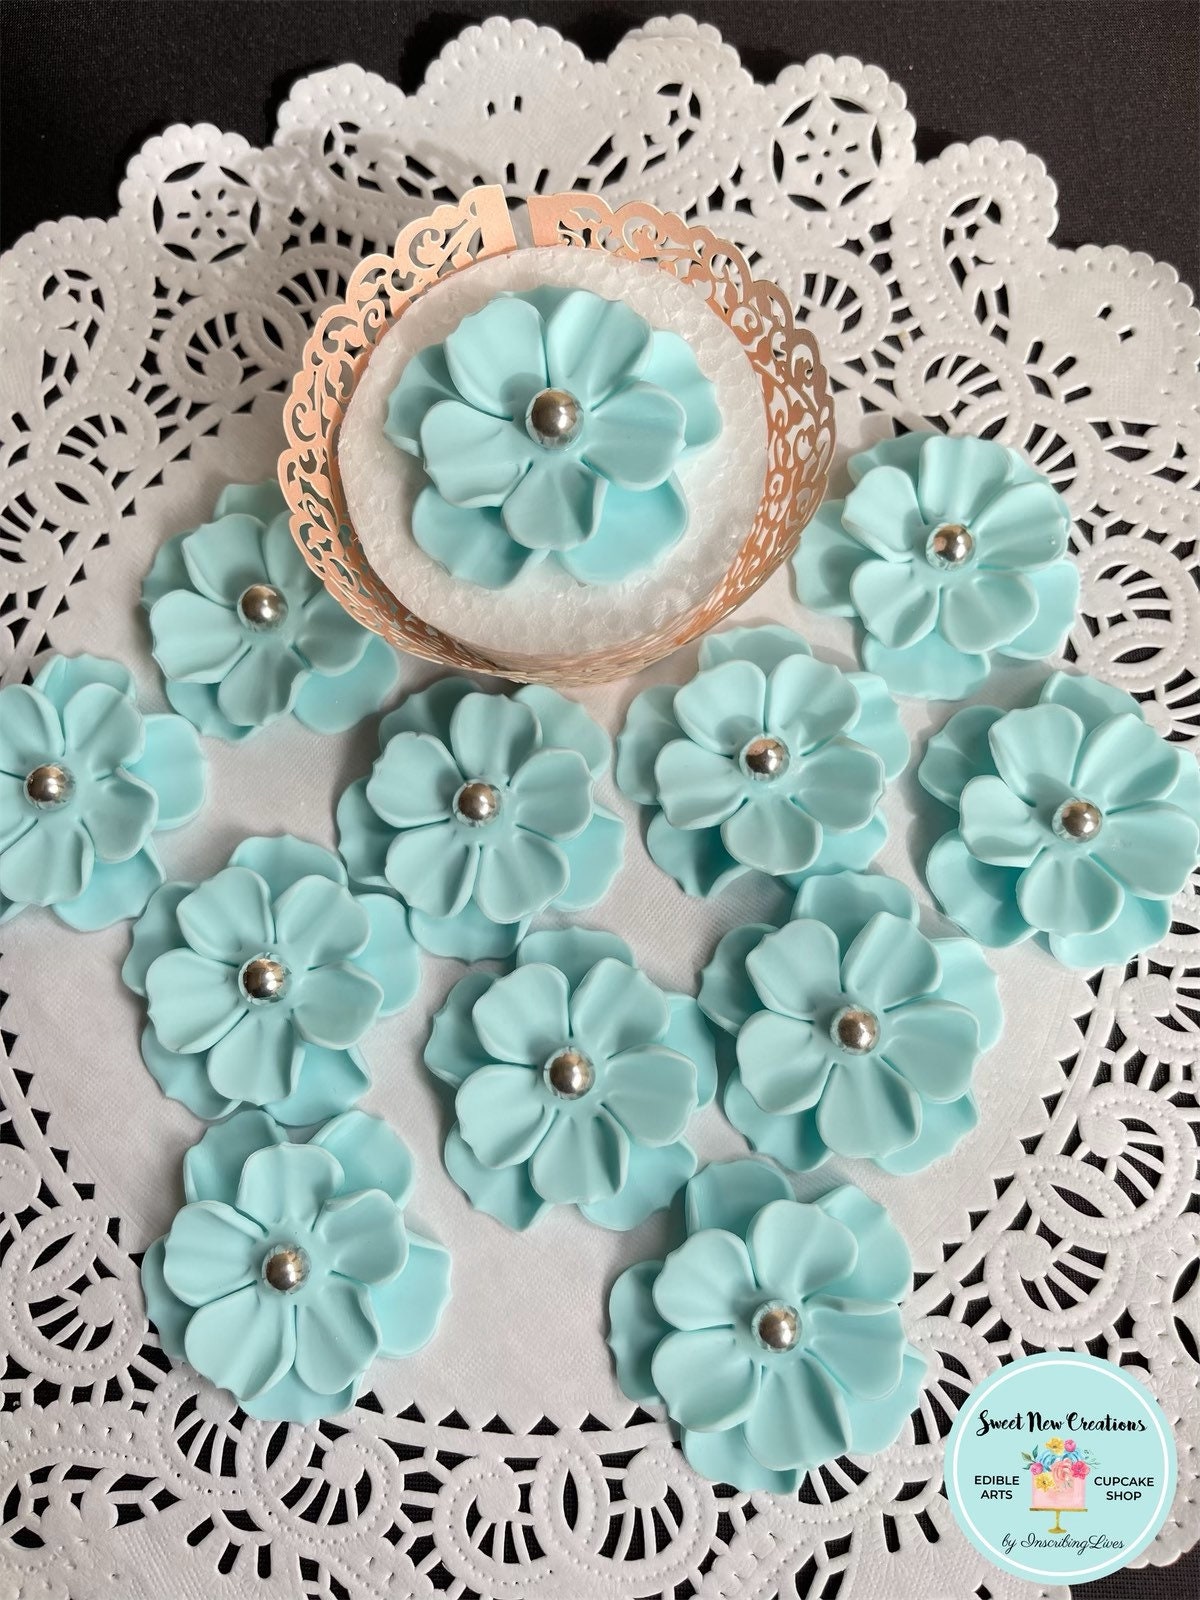 Edible Flowers For Cakes  The Cake Decorating Company